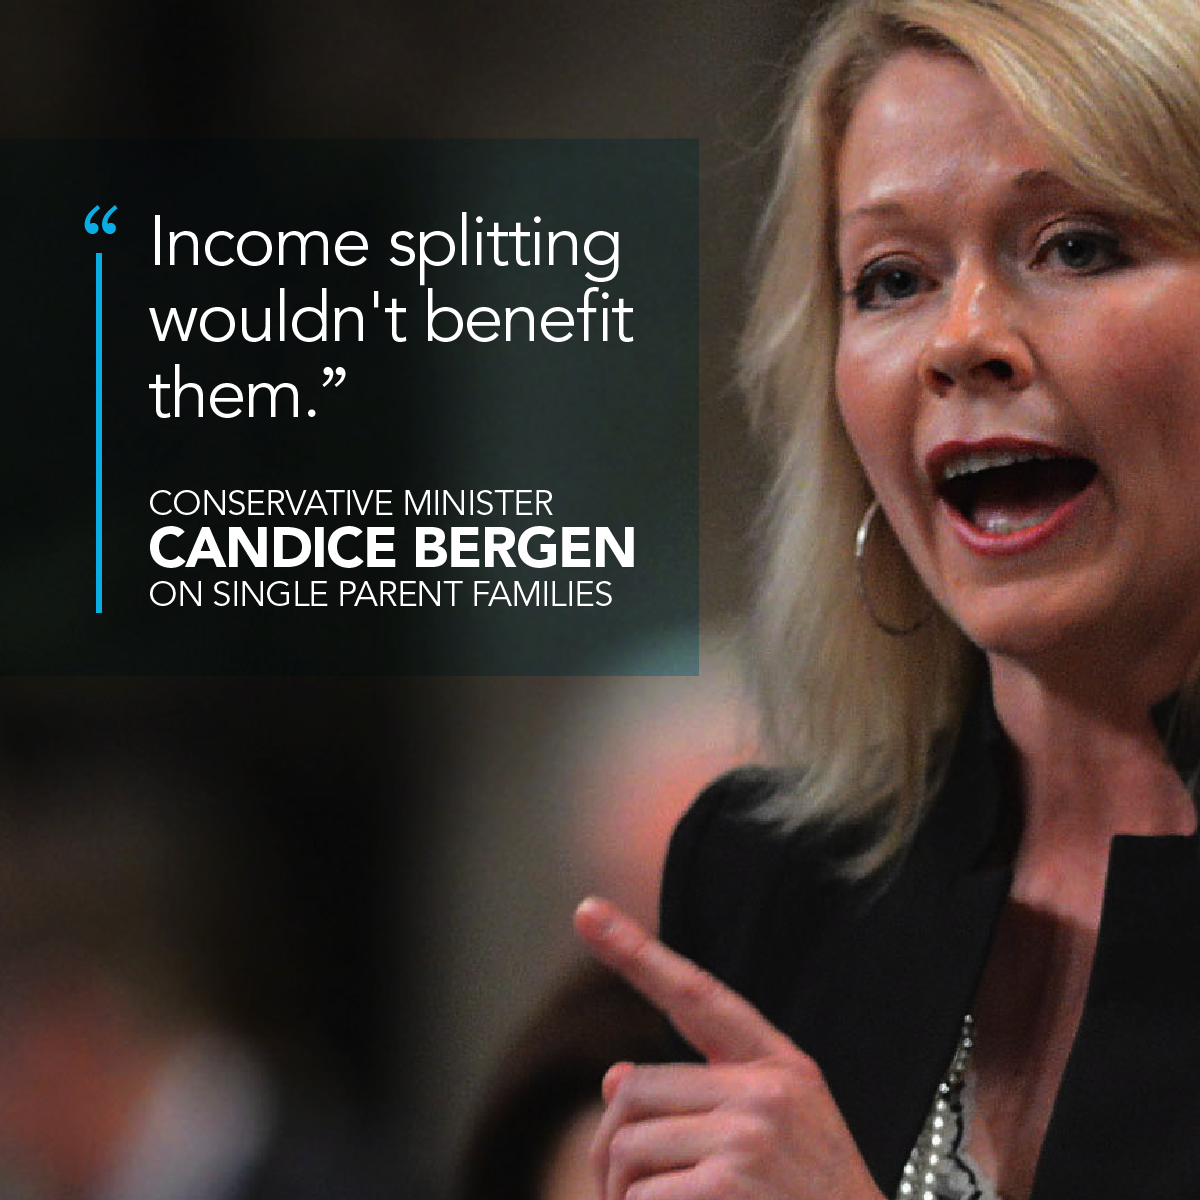 'Income splitting wouldn't benefit them' - Conservative Minister Candice Bergen on single parent families